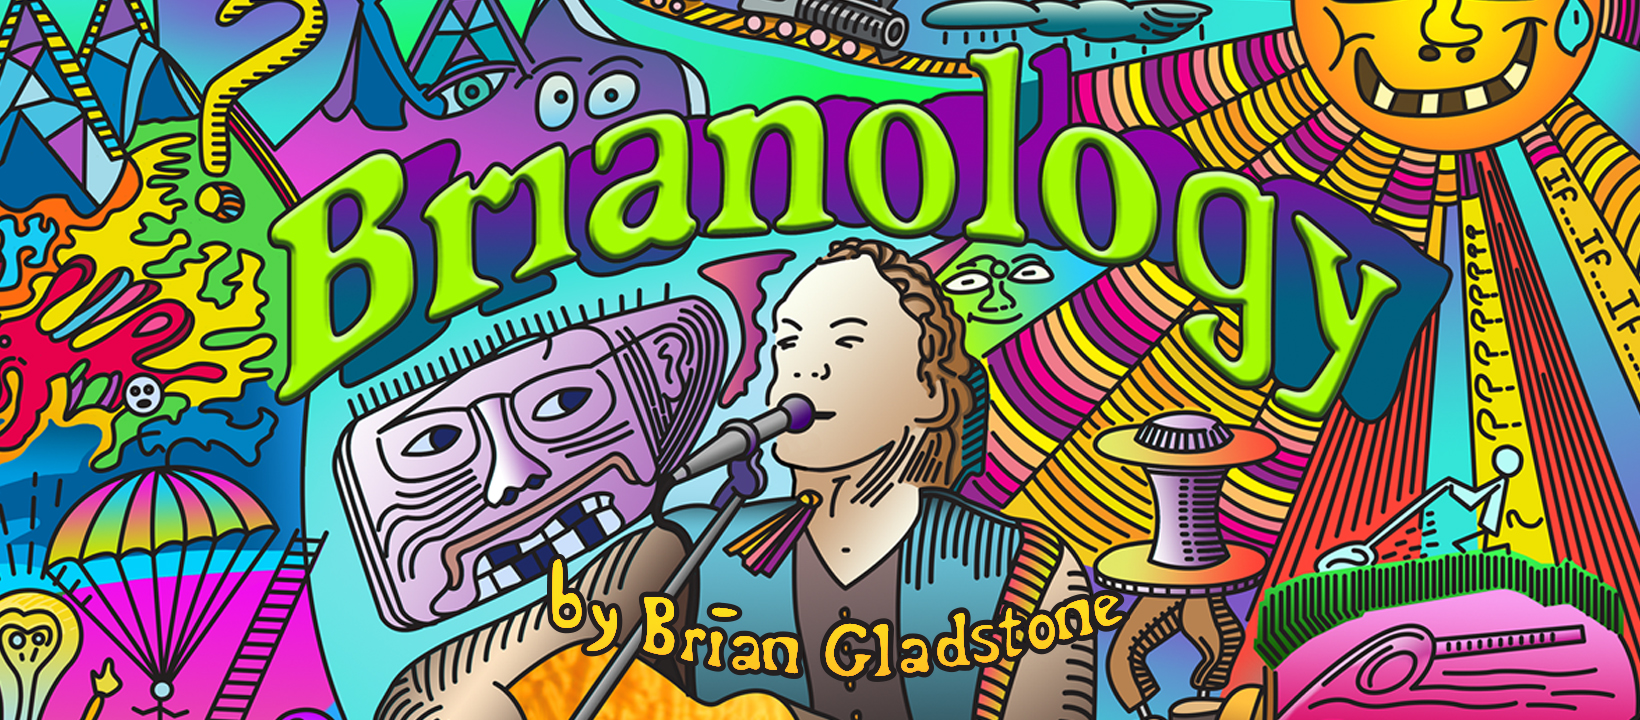 Brianology – New Album From Brian Gladstone